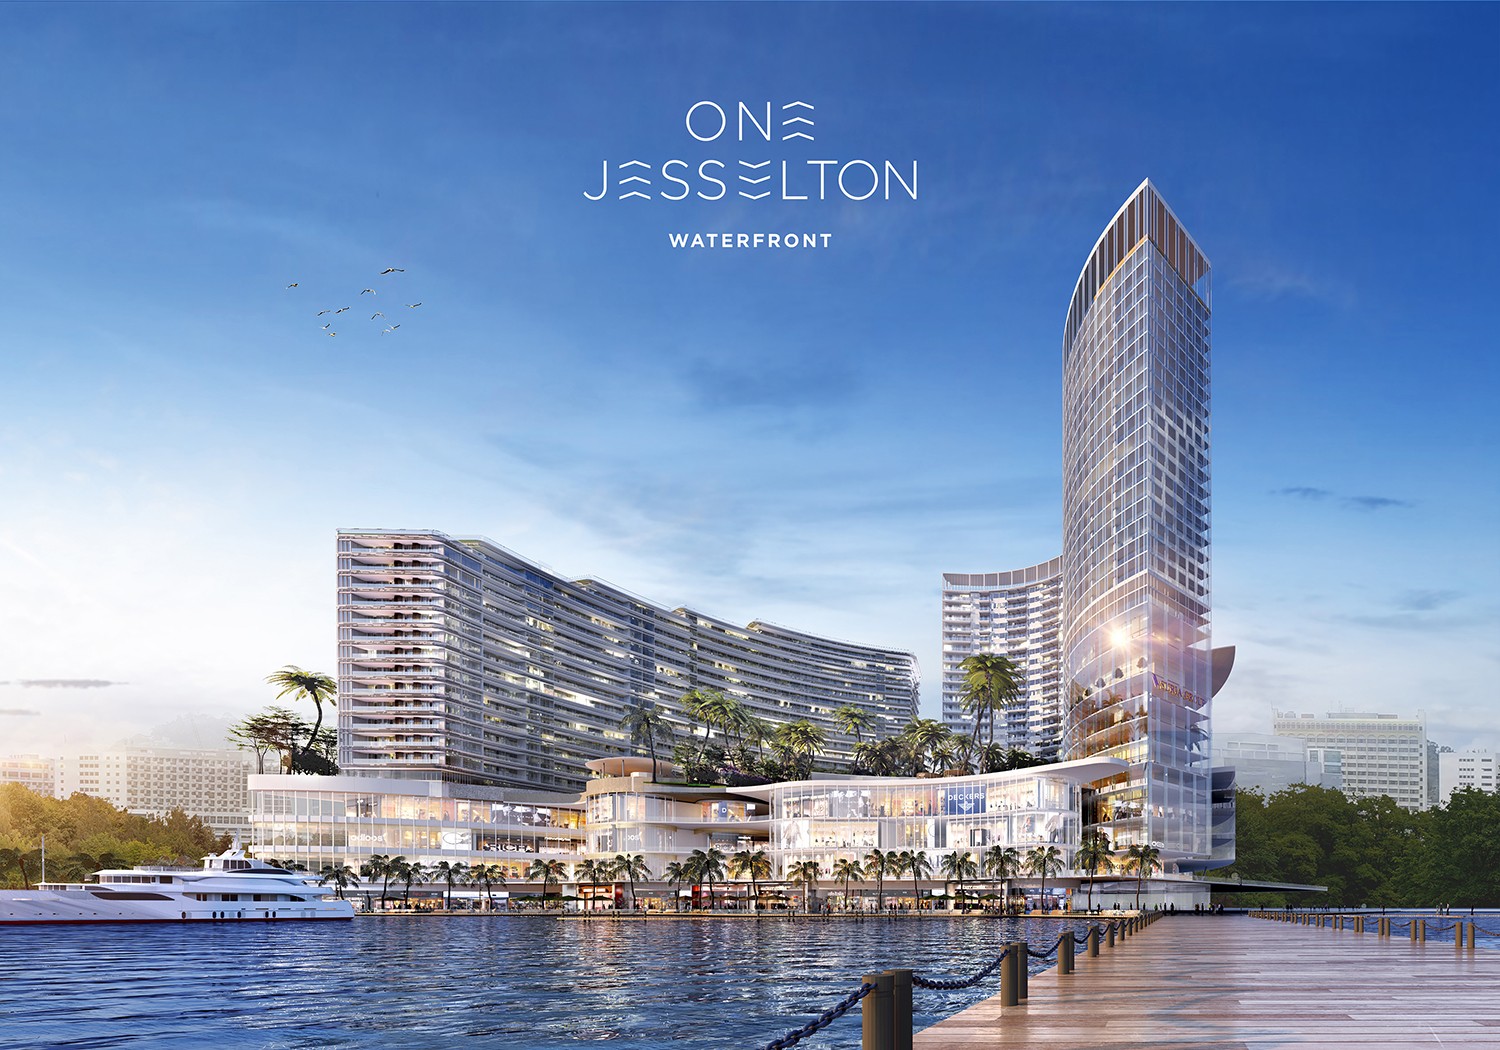 One Jesselton waterfront, mixed development comprising premier retail mall, hotel, serviced suites, residential condominiums and commercial office space.